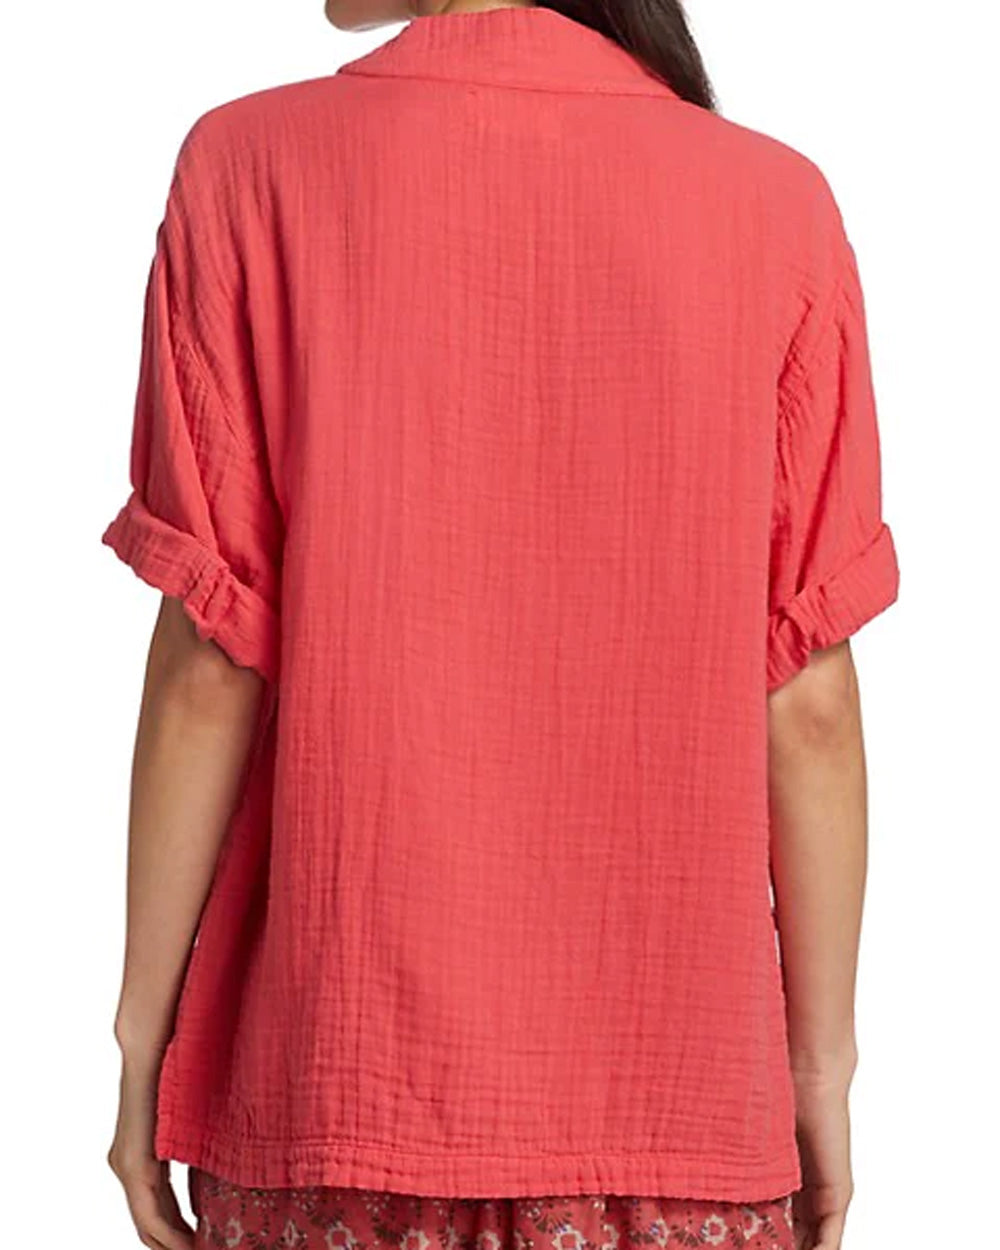 Rose Coral Avery Top